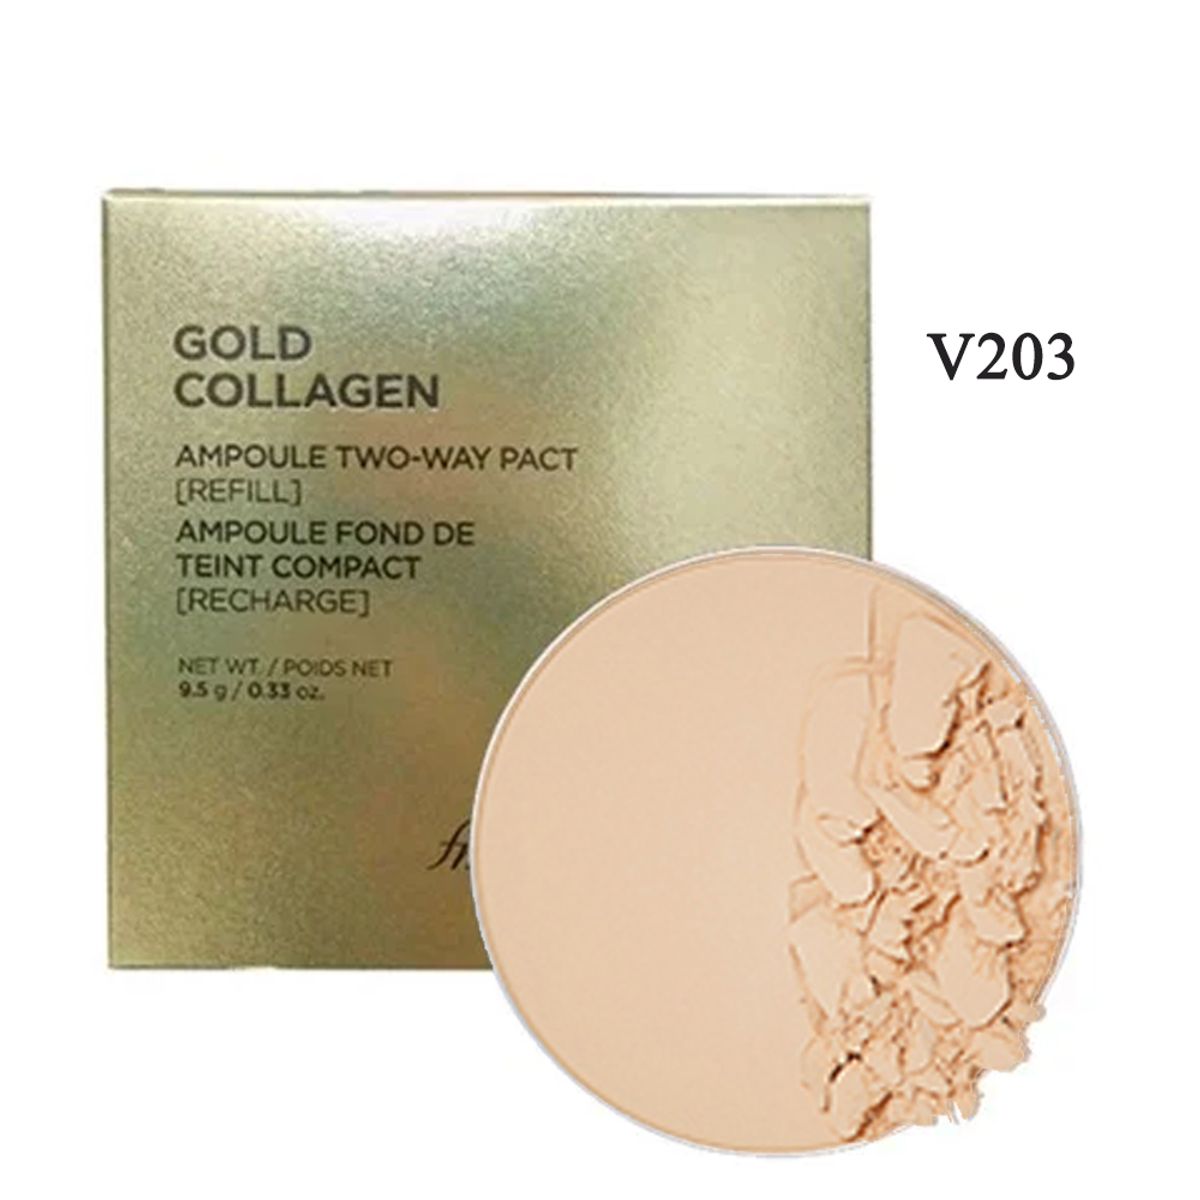 fmgt-loi-phan-nen-che-khuyet-diem-thefaceshop-gold-collagen-ampoule-two-way-pact-spf30-pa-refill-2